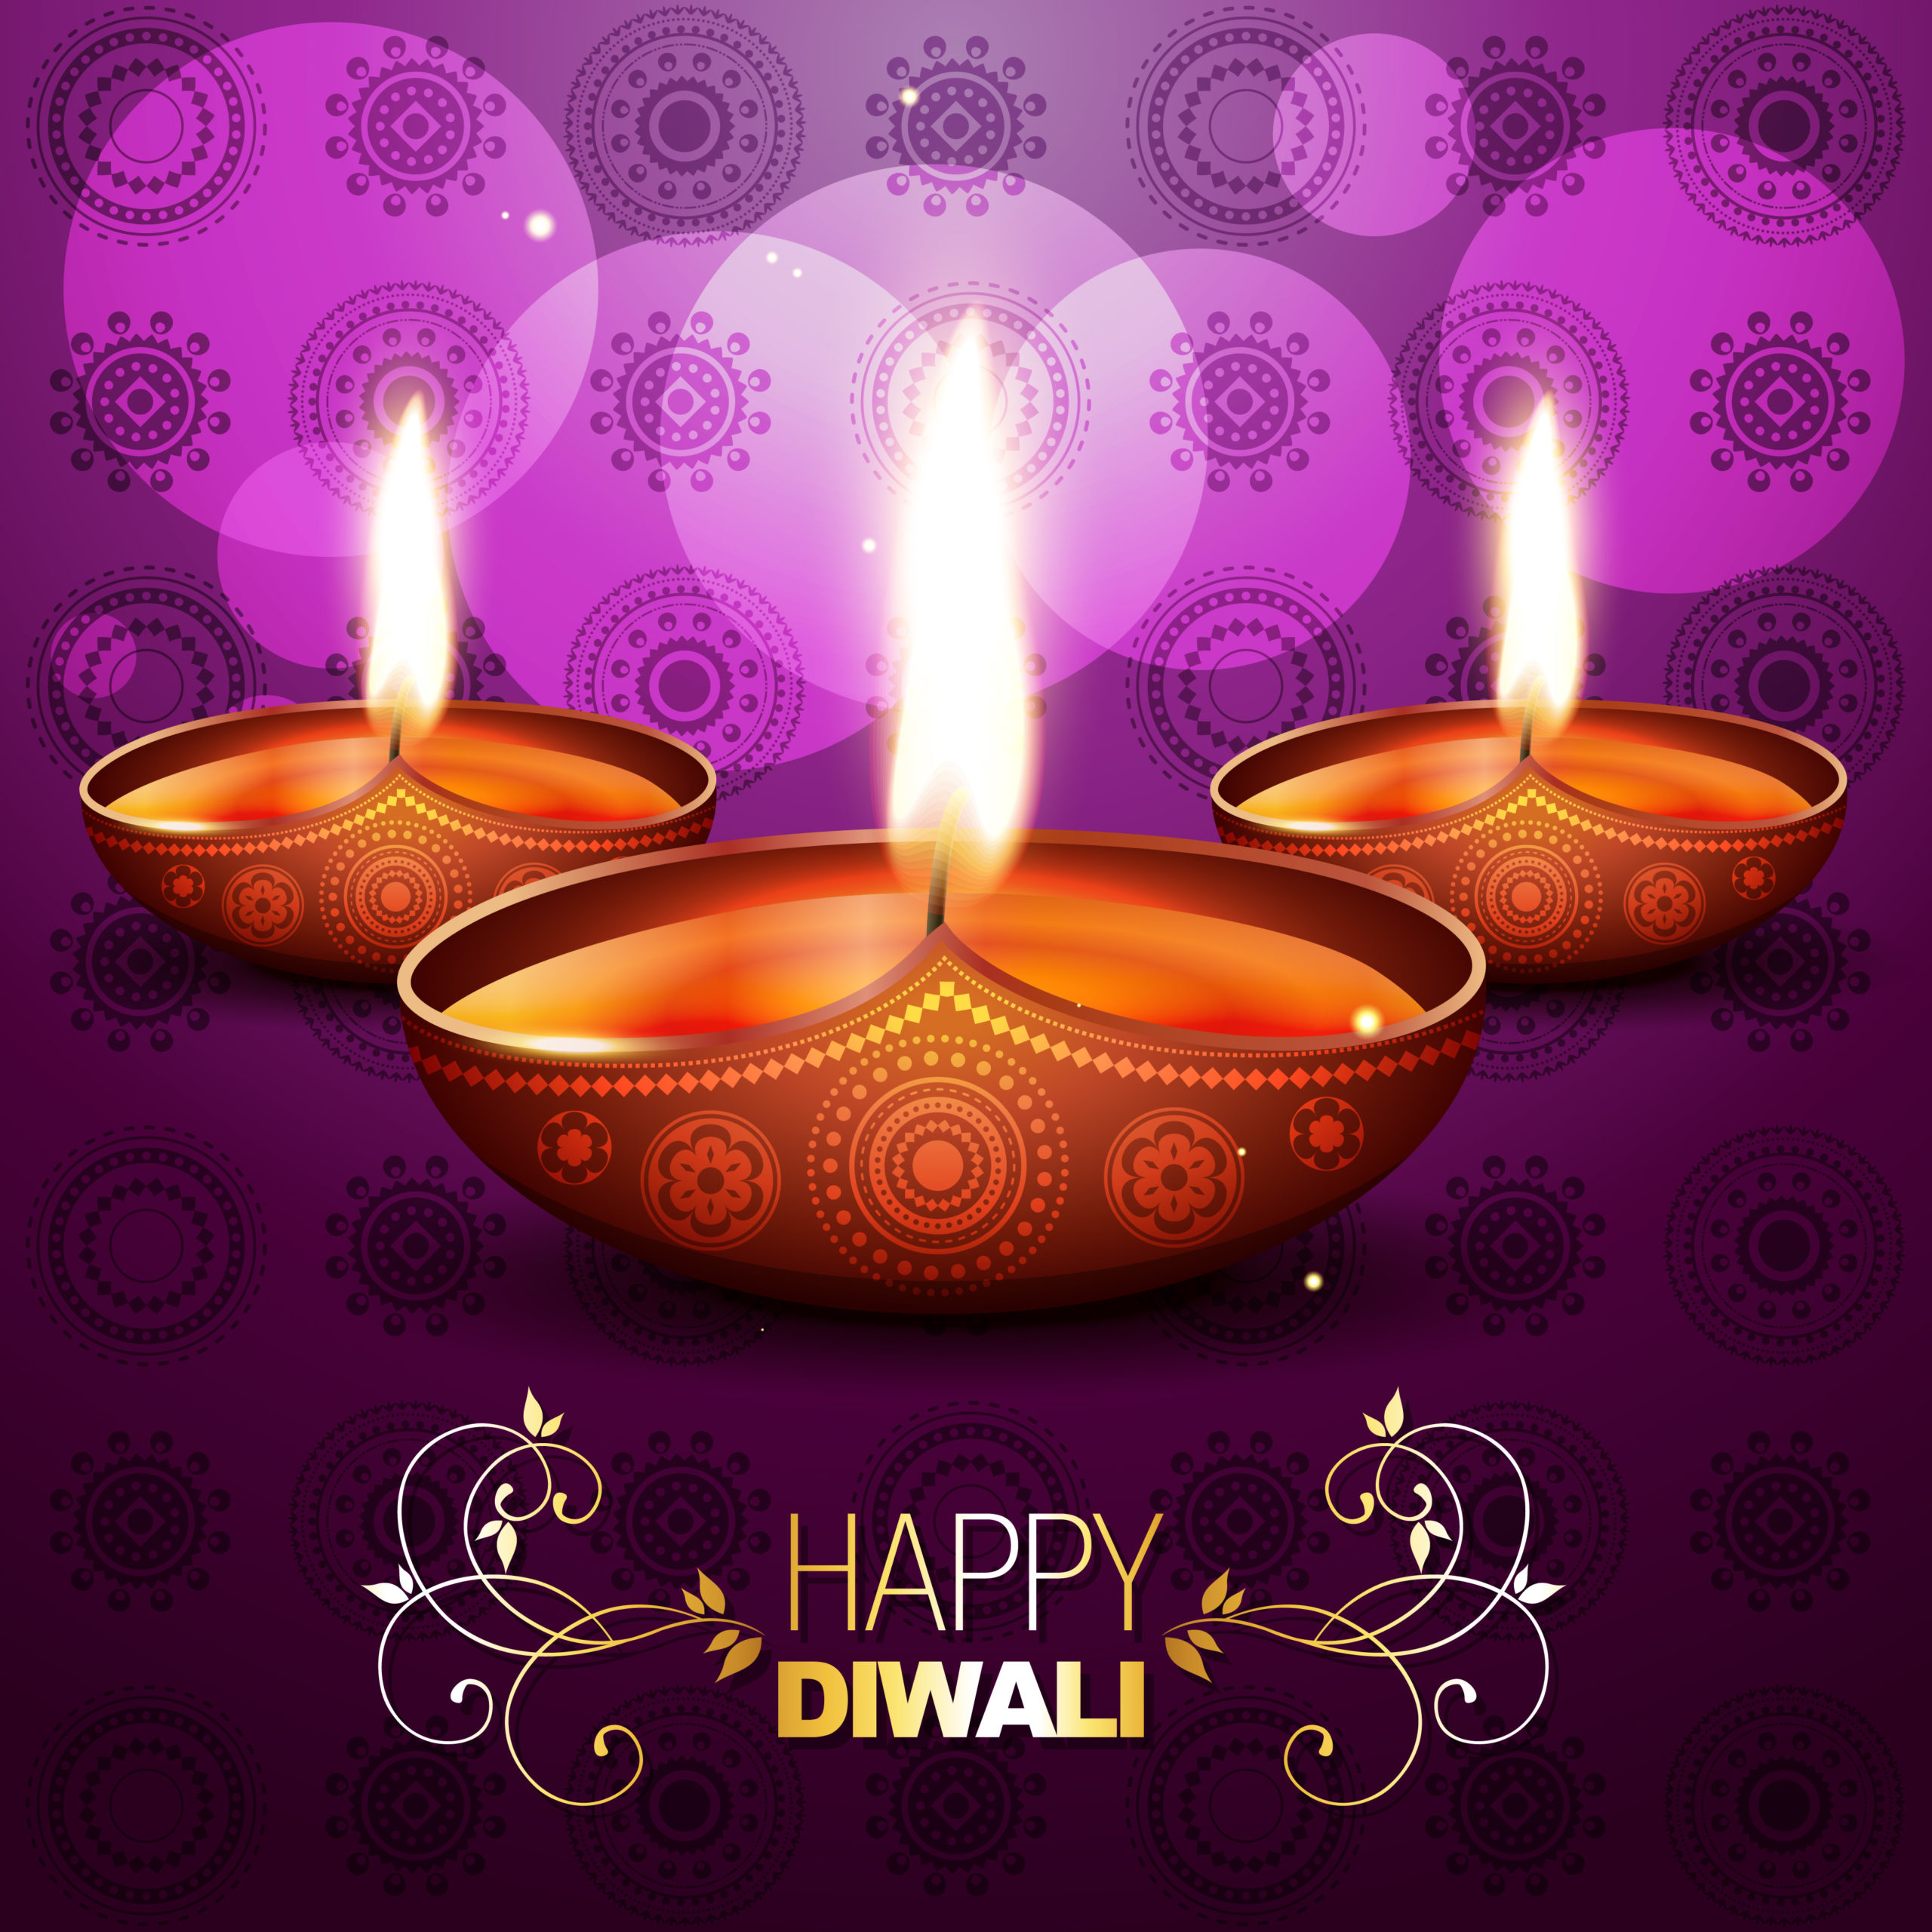 Happy Diwali 2021 Wishes, HD Images, Greetings, Quotes, and Messages to Share